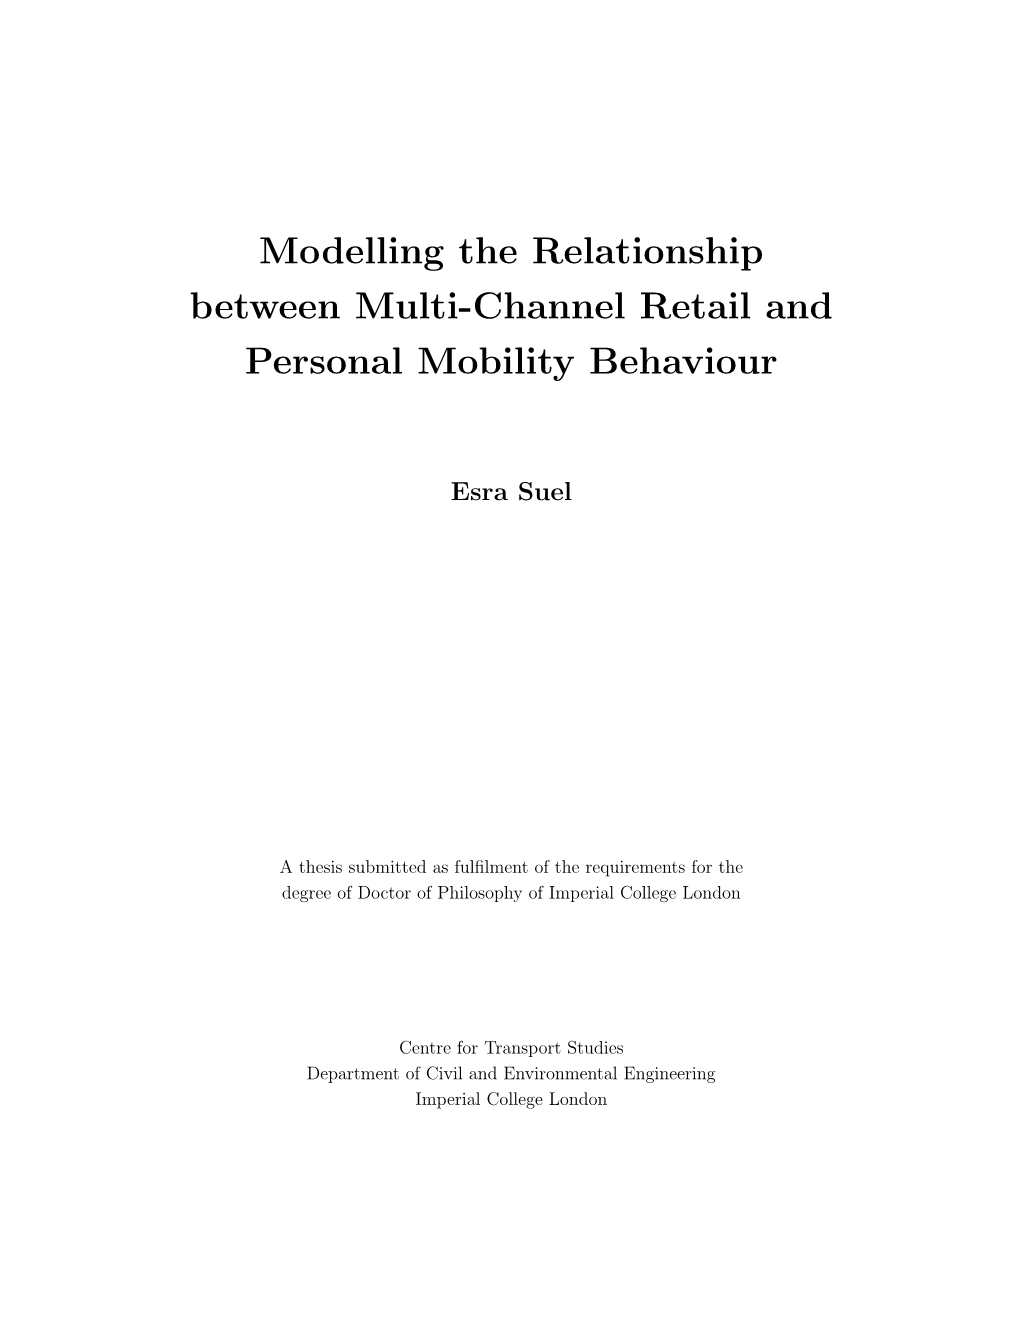 Modelling the Relationship Between Multi-Channel Retail and Personal Mobility Behaviour